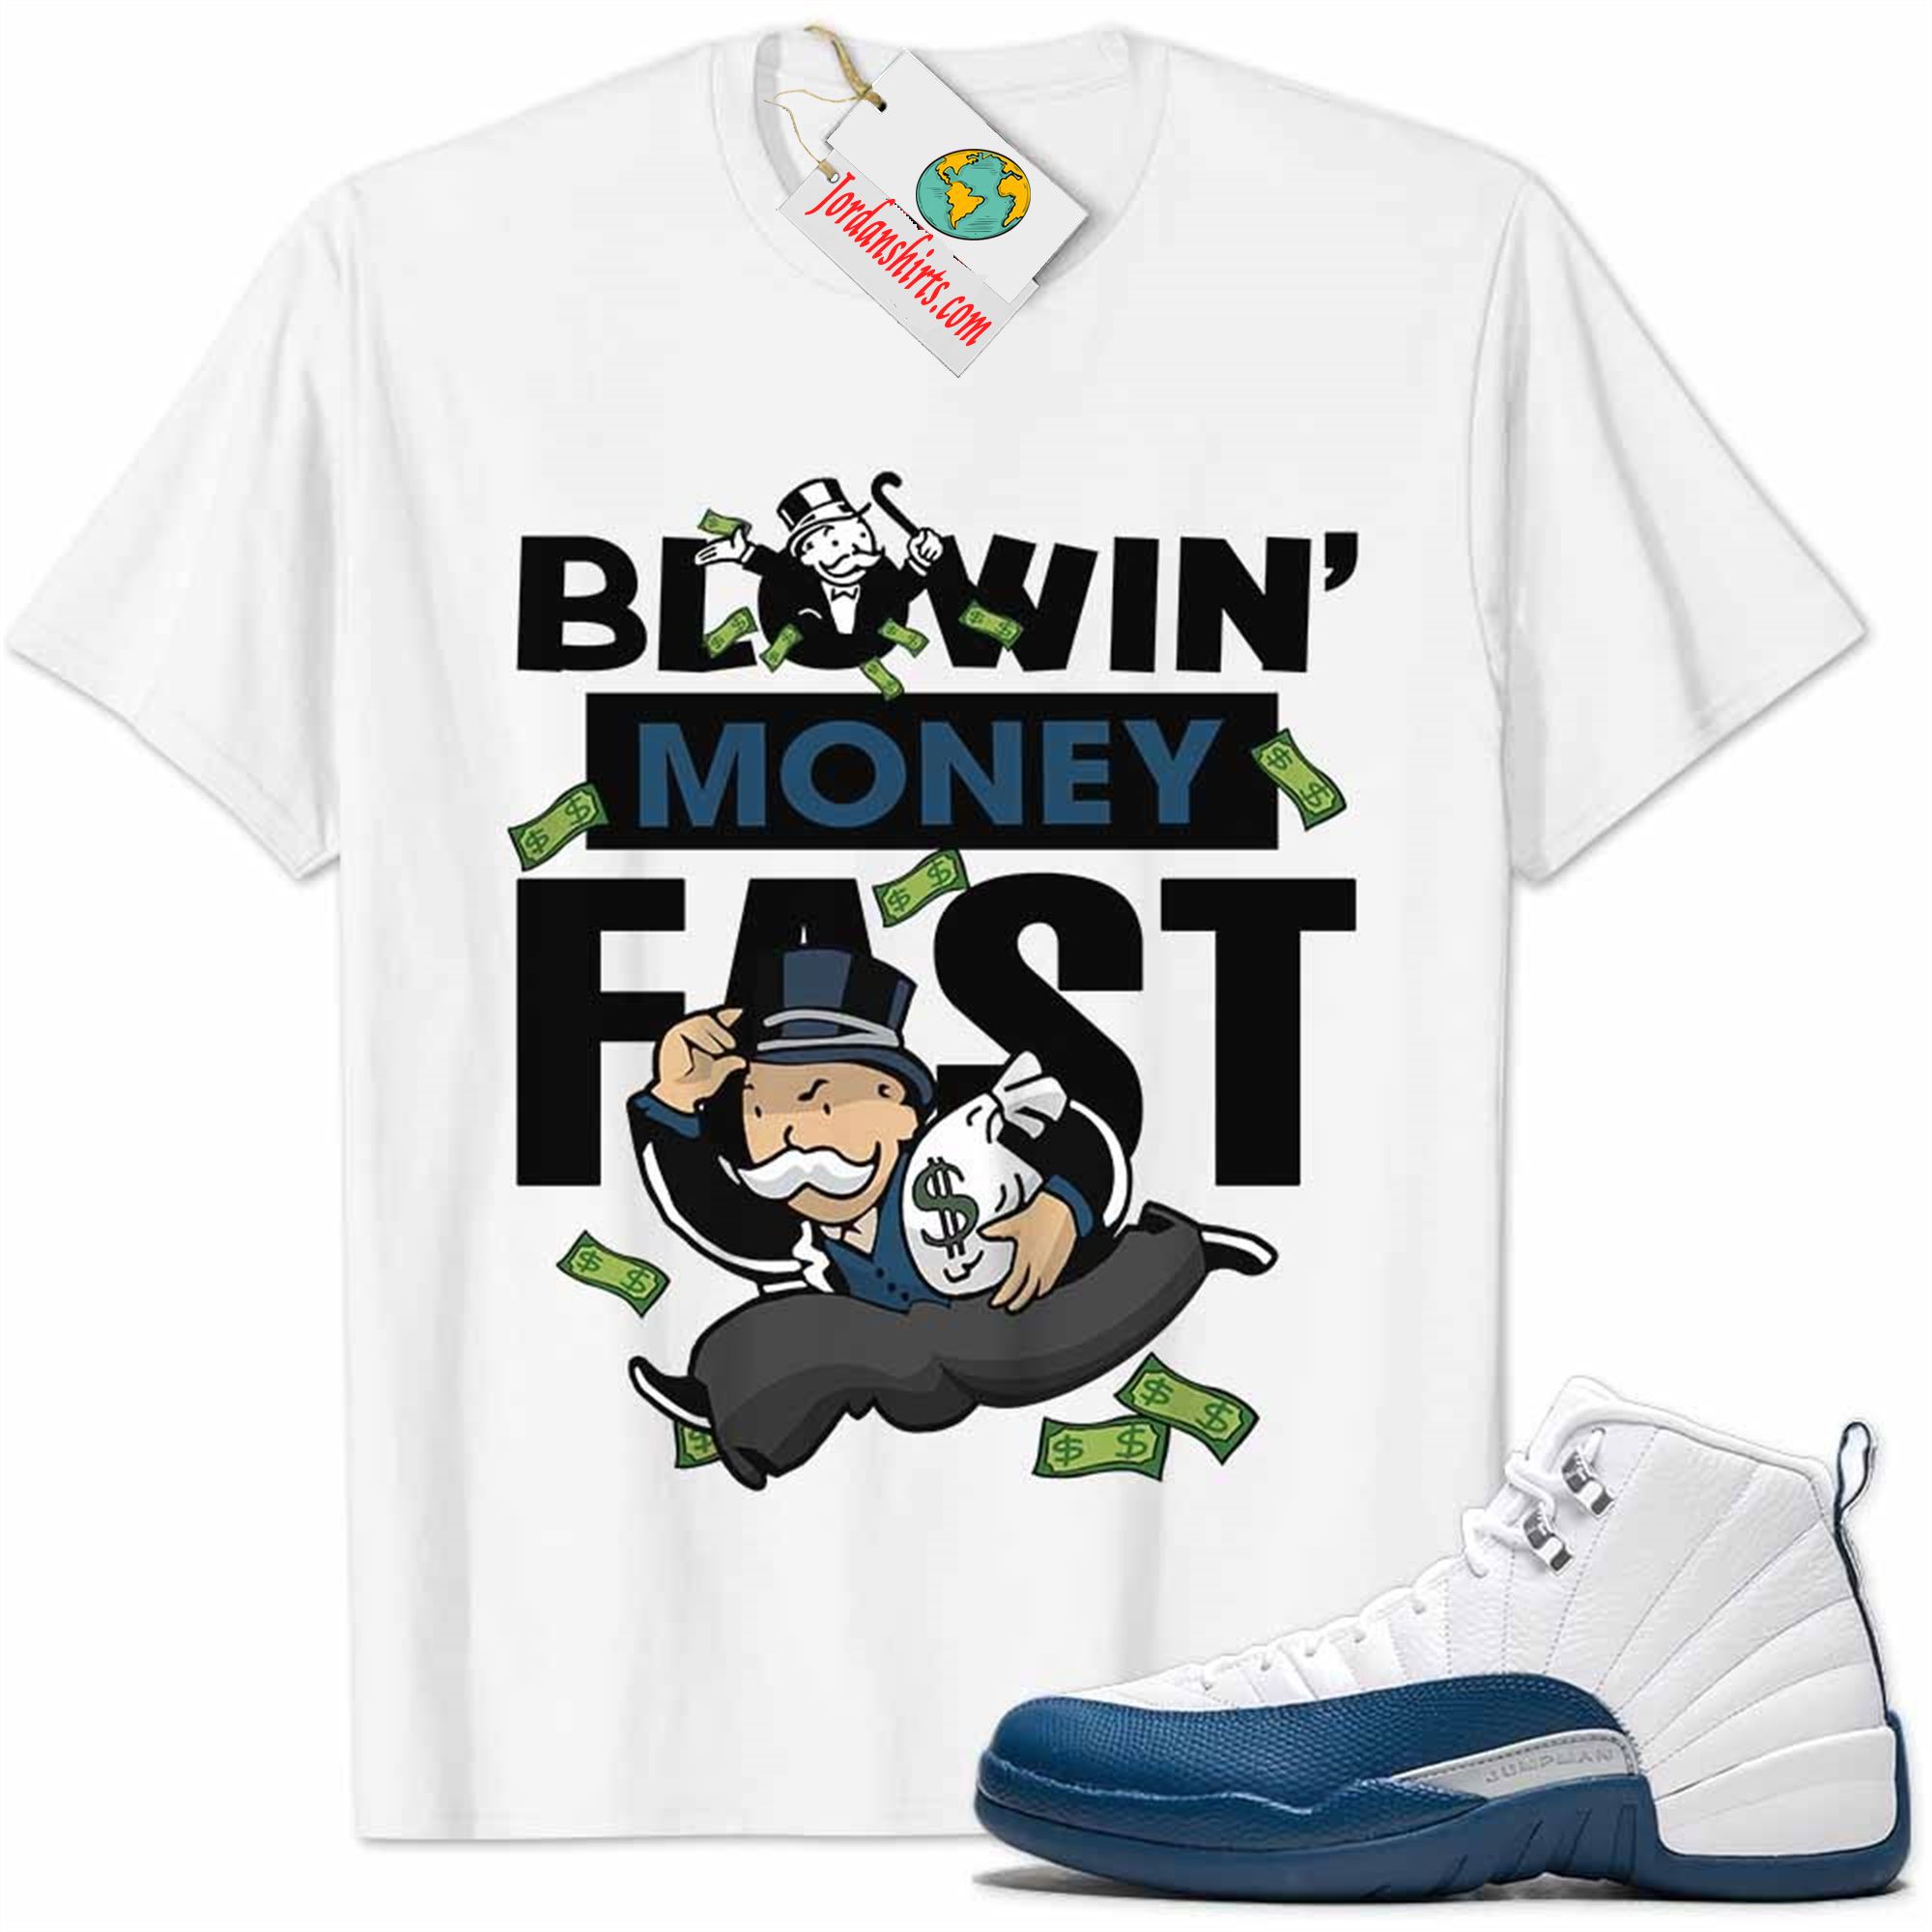 Jordan 12 Shirt, French Blue 12s Shirt Blowin Money Fast Mr Monopoly White Full Size Up To 5xl